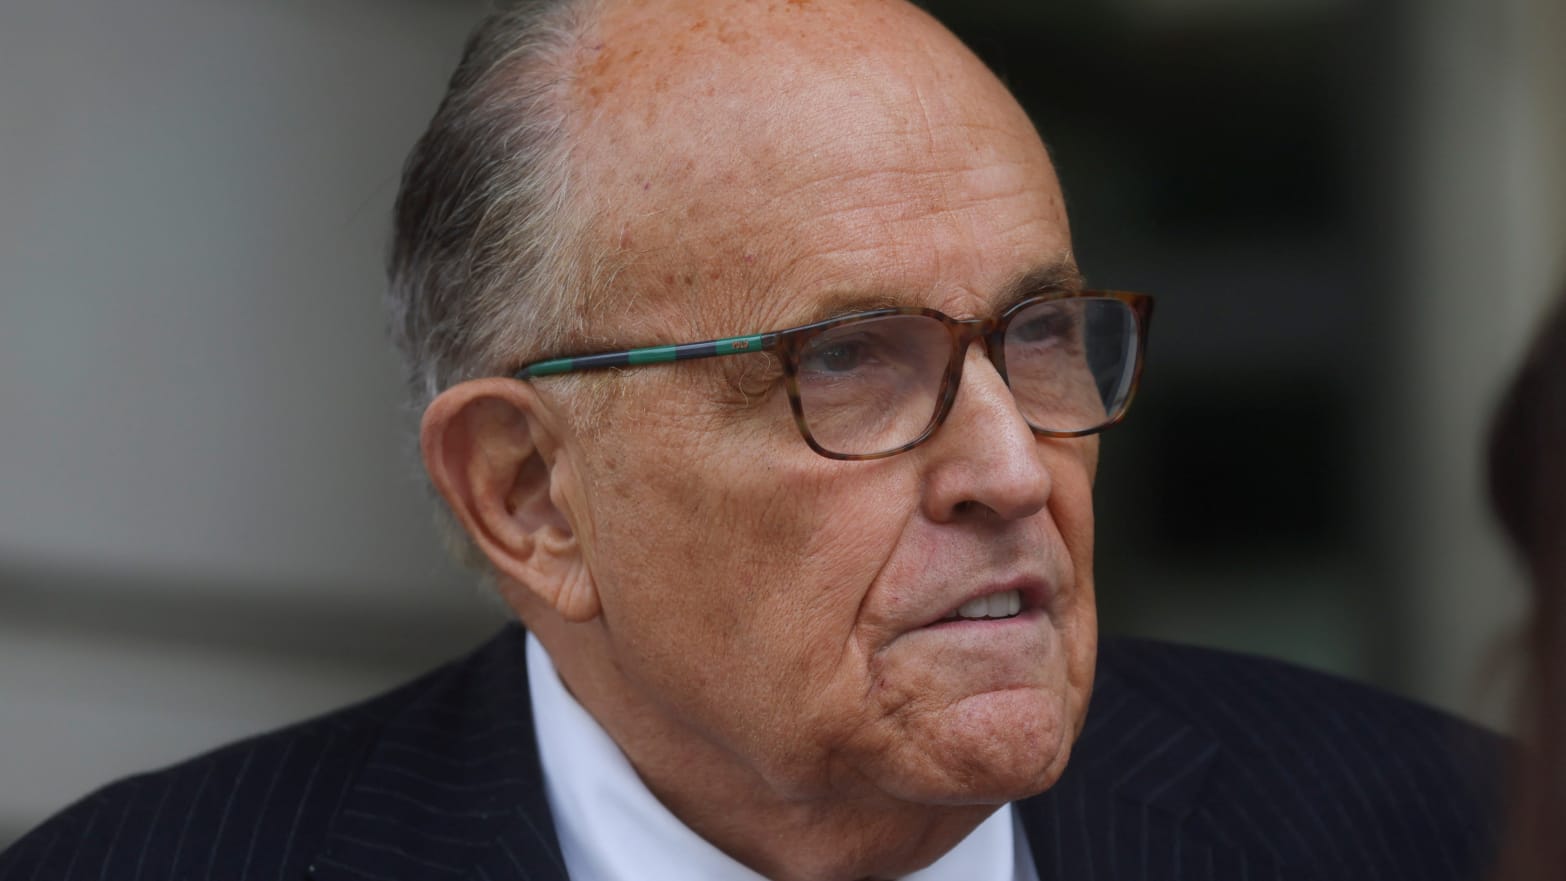 Rudy Giuliani, wearing glasses and a suit, looks forward as he leaves a federal courthouse.